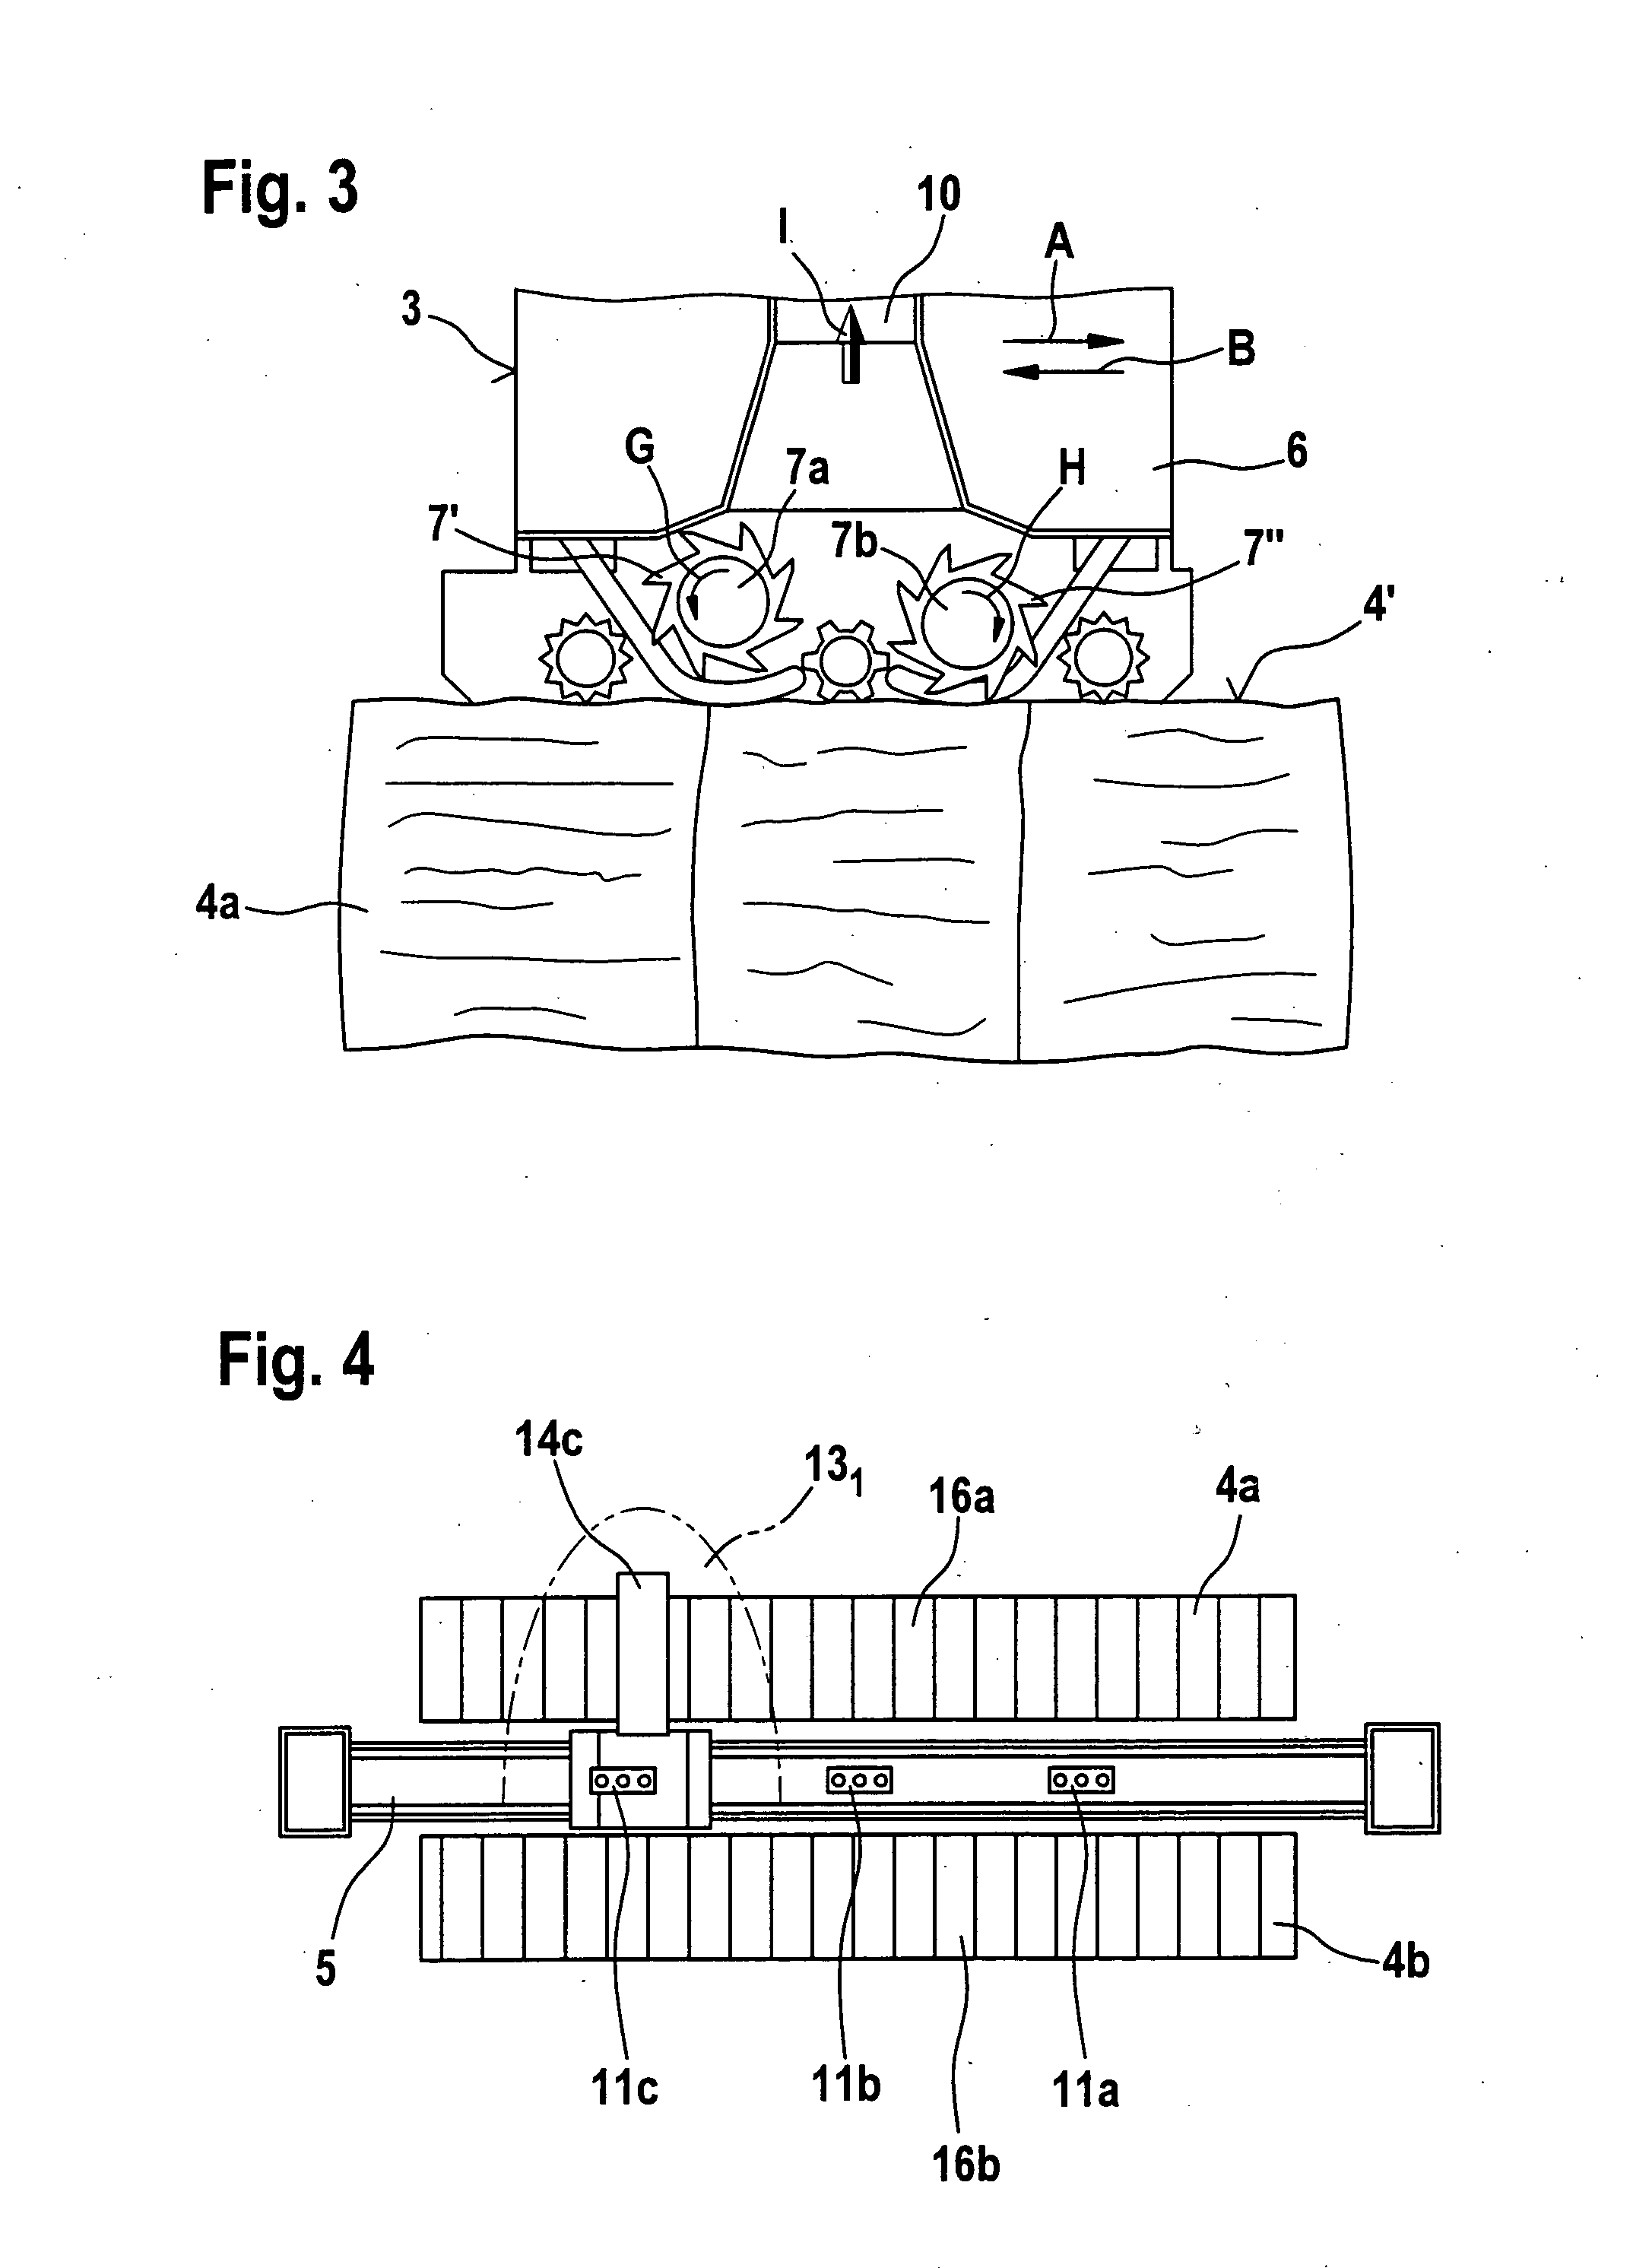 Apparatus for monitoring and securing danger zones on power-driven textile machines